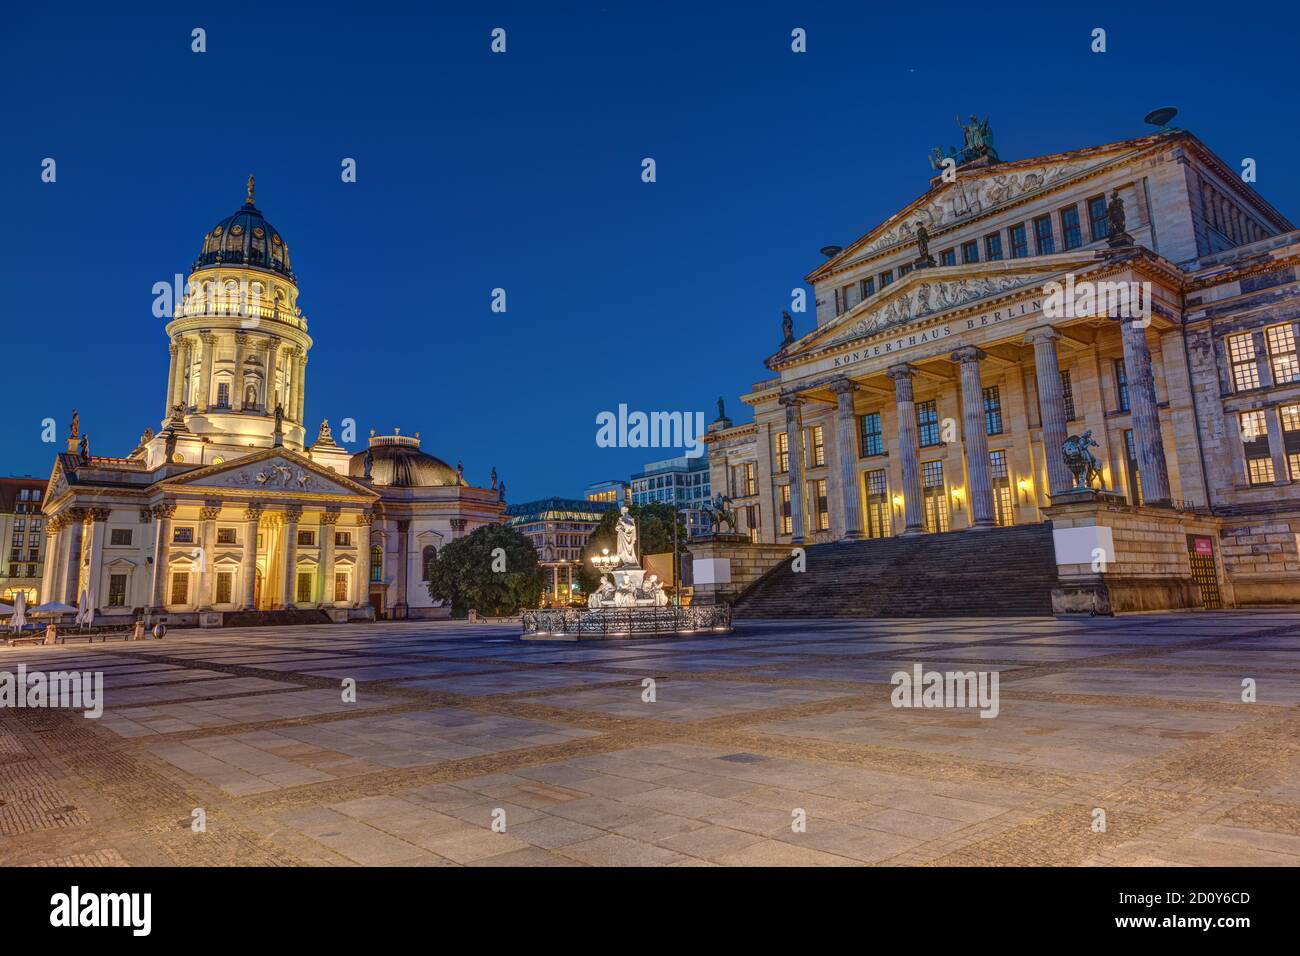 The Gendarmenmarkt square in Berlin at dawn with no people Stock Photo